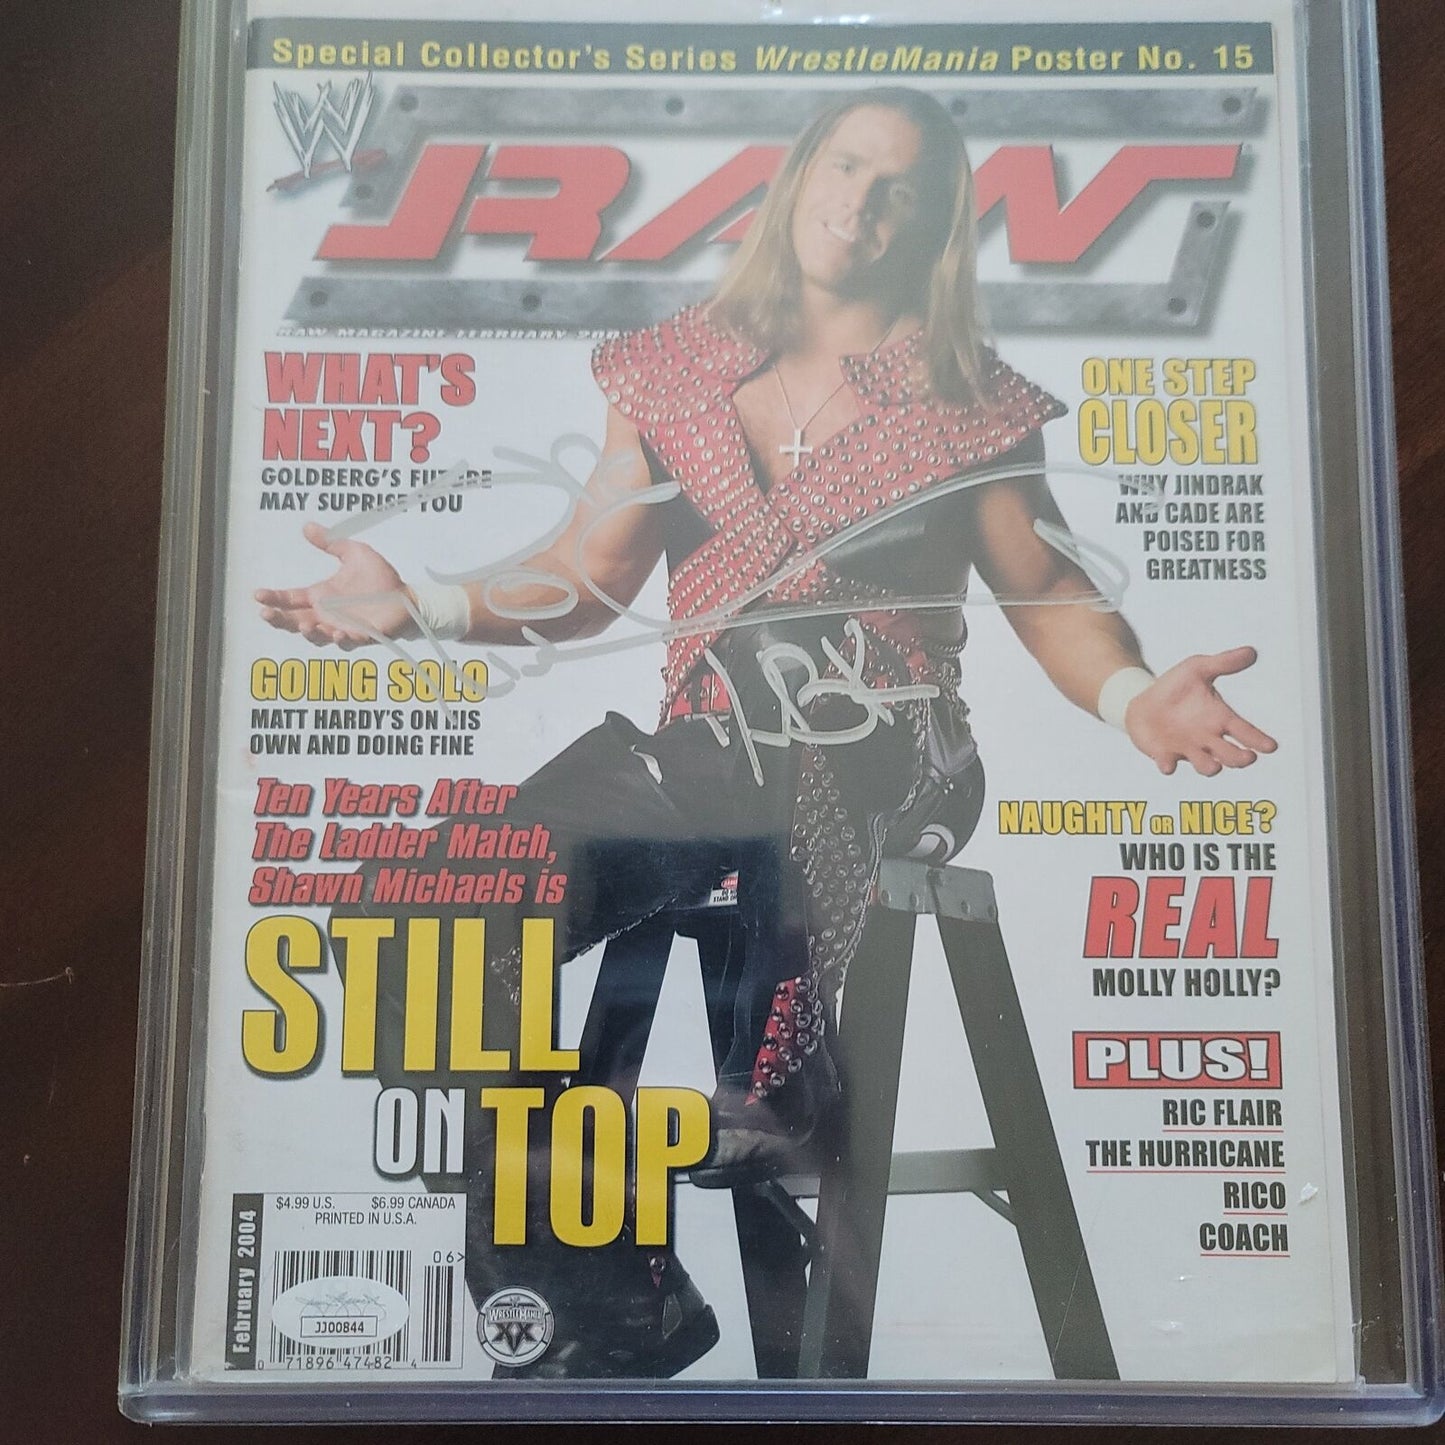 Hbk shawn michaels (full magazine) jsa certed cover signed auto autographed